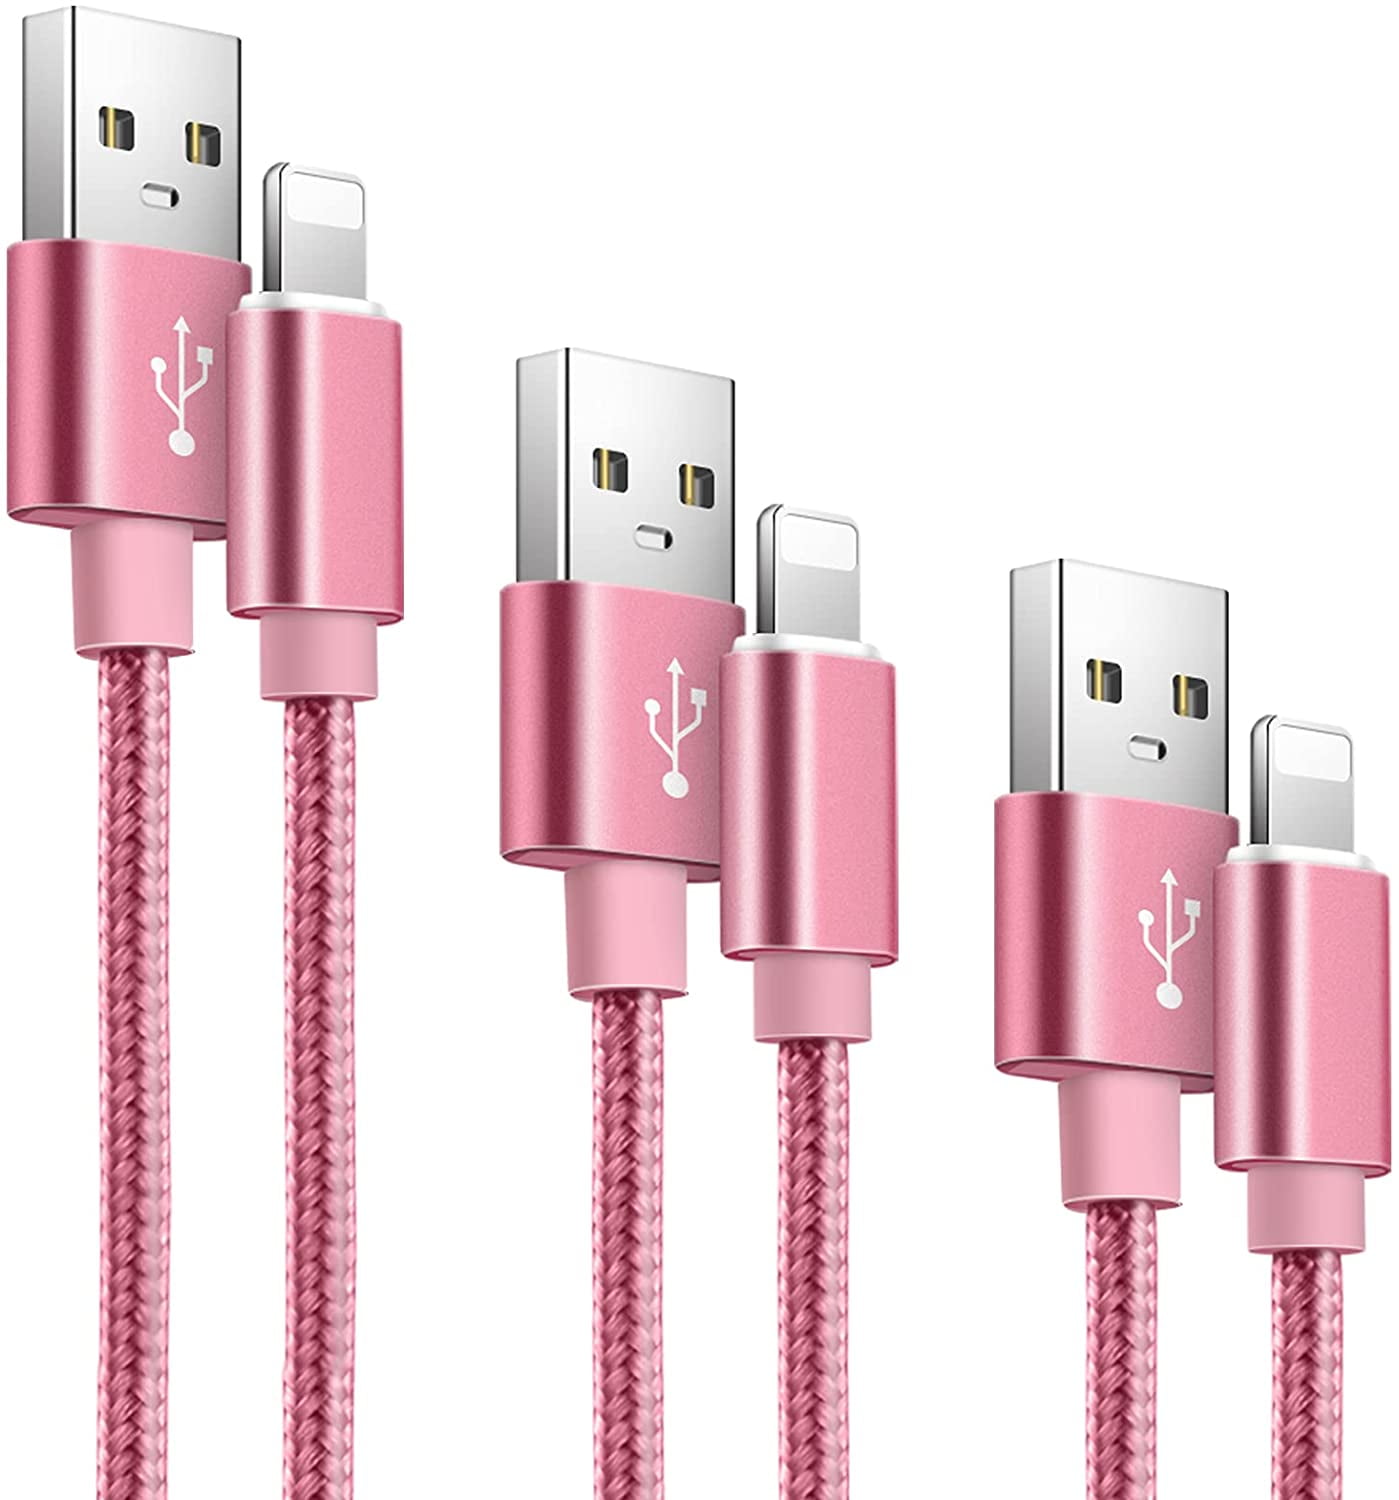 MFi Certified iPhone Charger Lightning Cable 6 Pack Extra Long Nylon Braided USB Charging & Syncing Cord Compatible iPhone Xs/Max/XR/X/8/8Plus/7/7Plus/6S/6S Plus/SE/iPad 3/3/3/6/6/10FT 